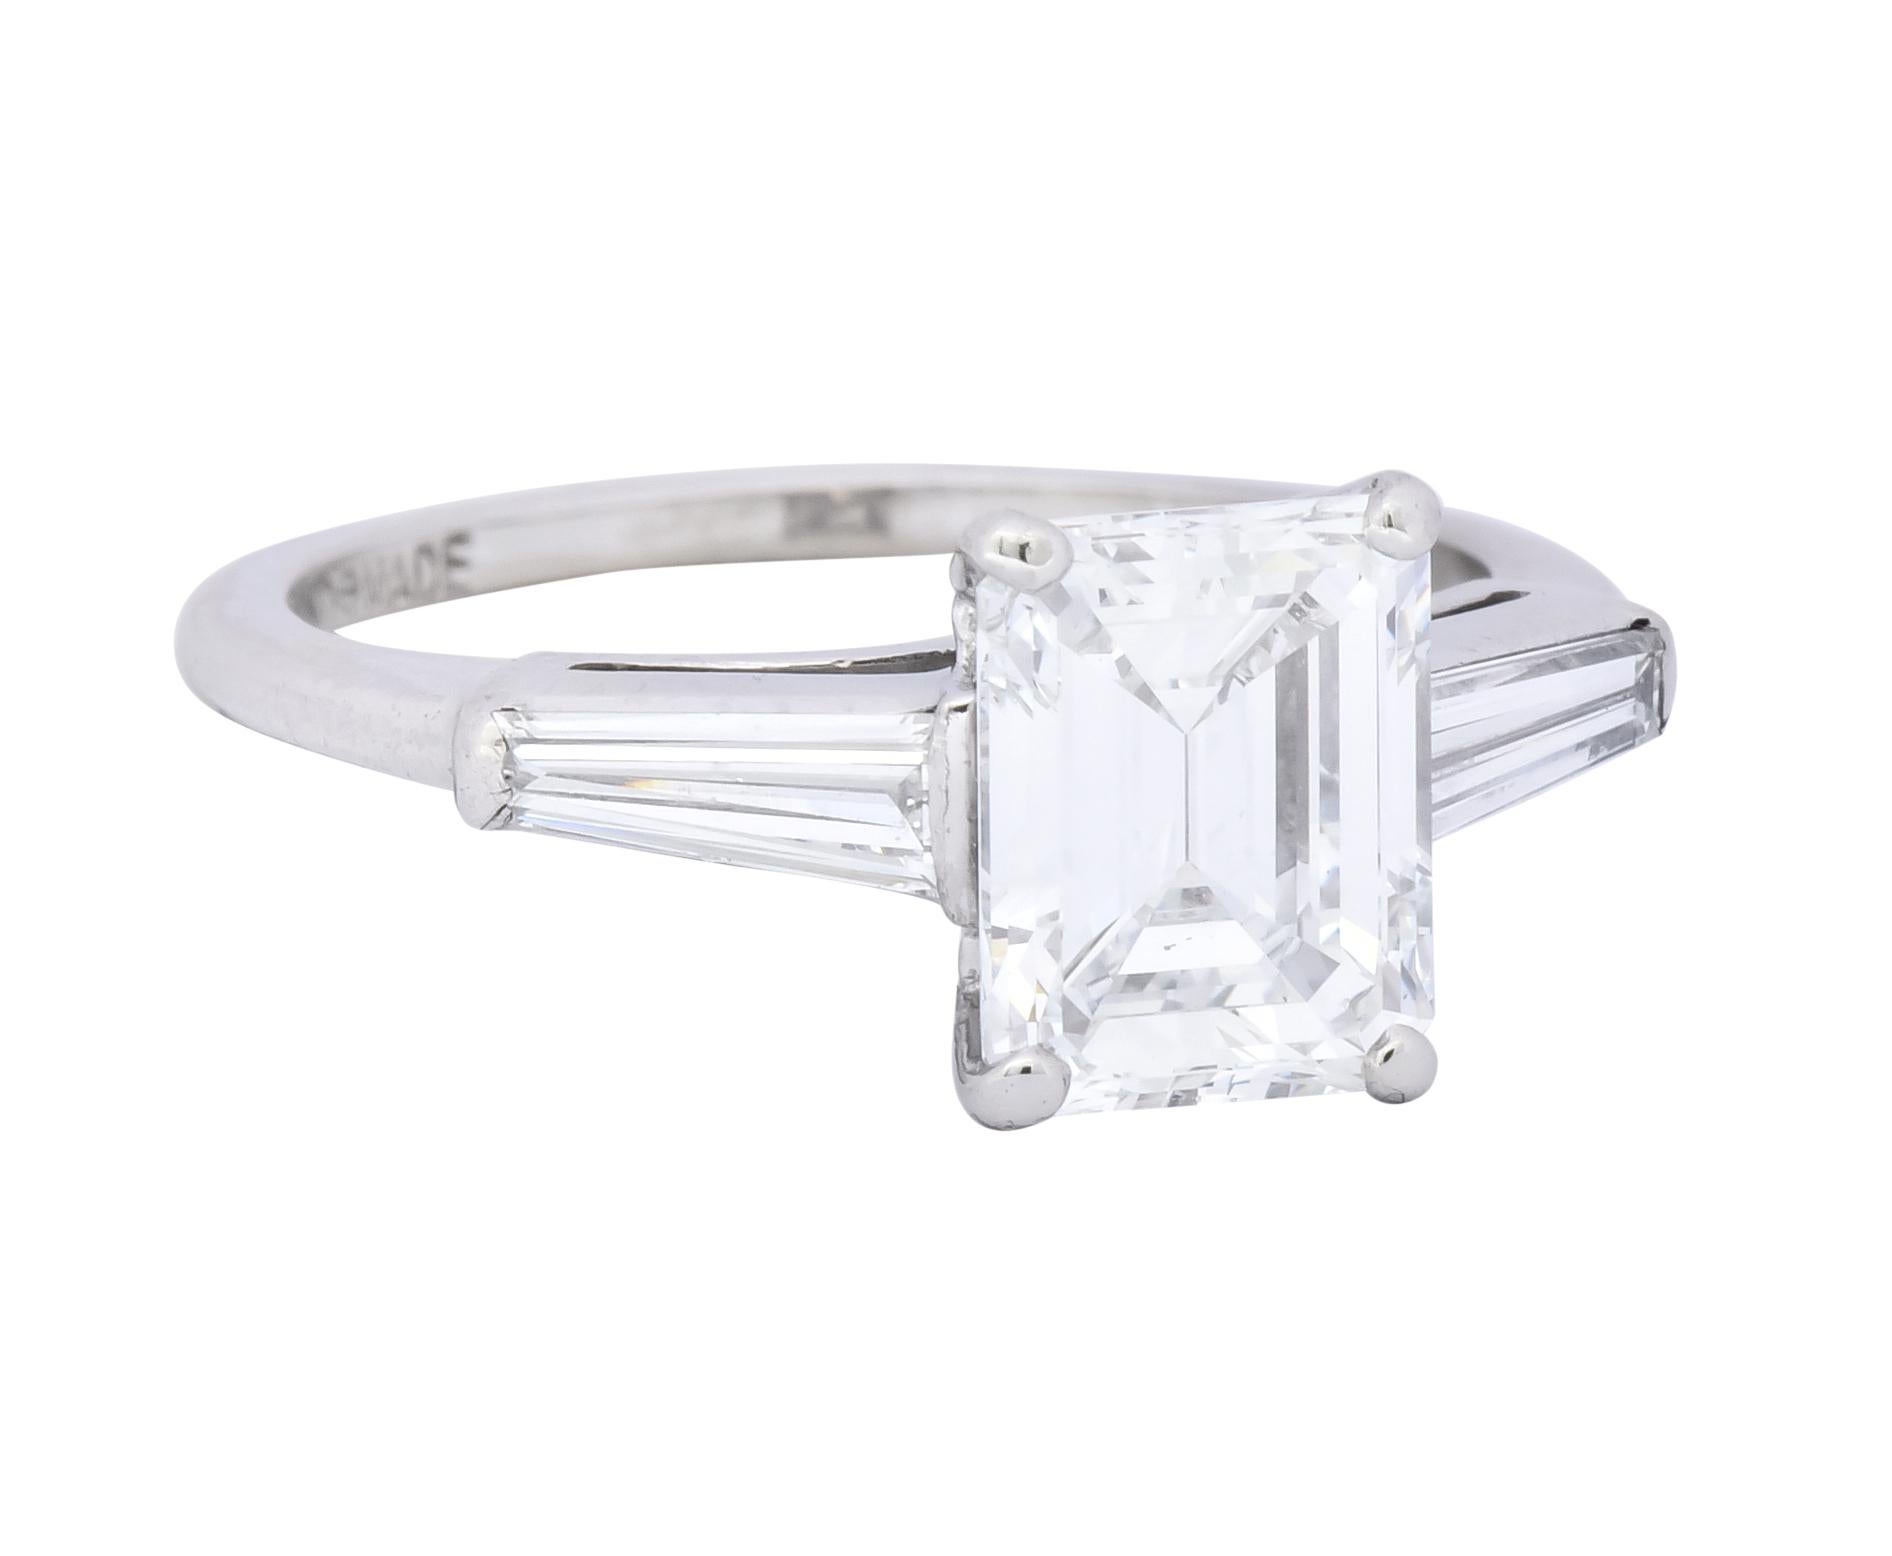 Centering a basket set emerald cut diamond weighing 1.63 carats, E color and VVS2 clarity

Flanked by two bar set tapered baguettes weighing approximately 0.40 carat total, E/F color and VS clarity

Stamped as handmade and 10% Irid Plat for